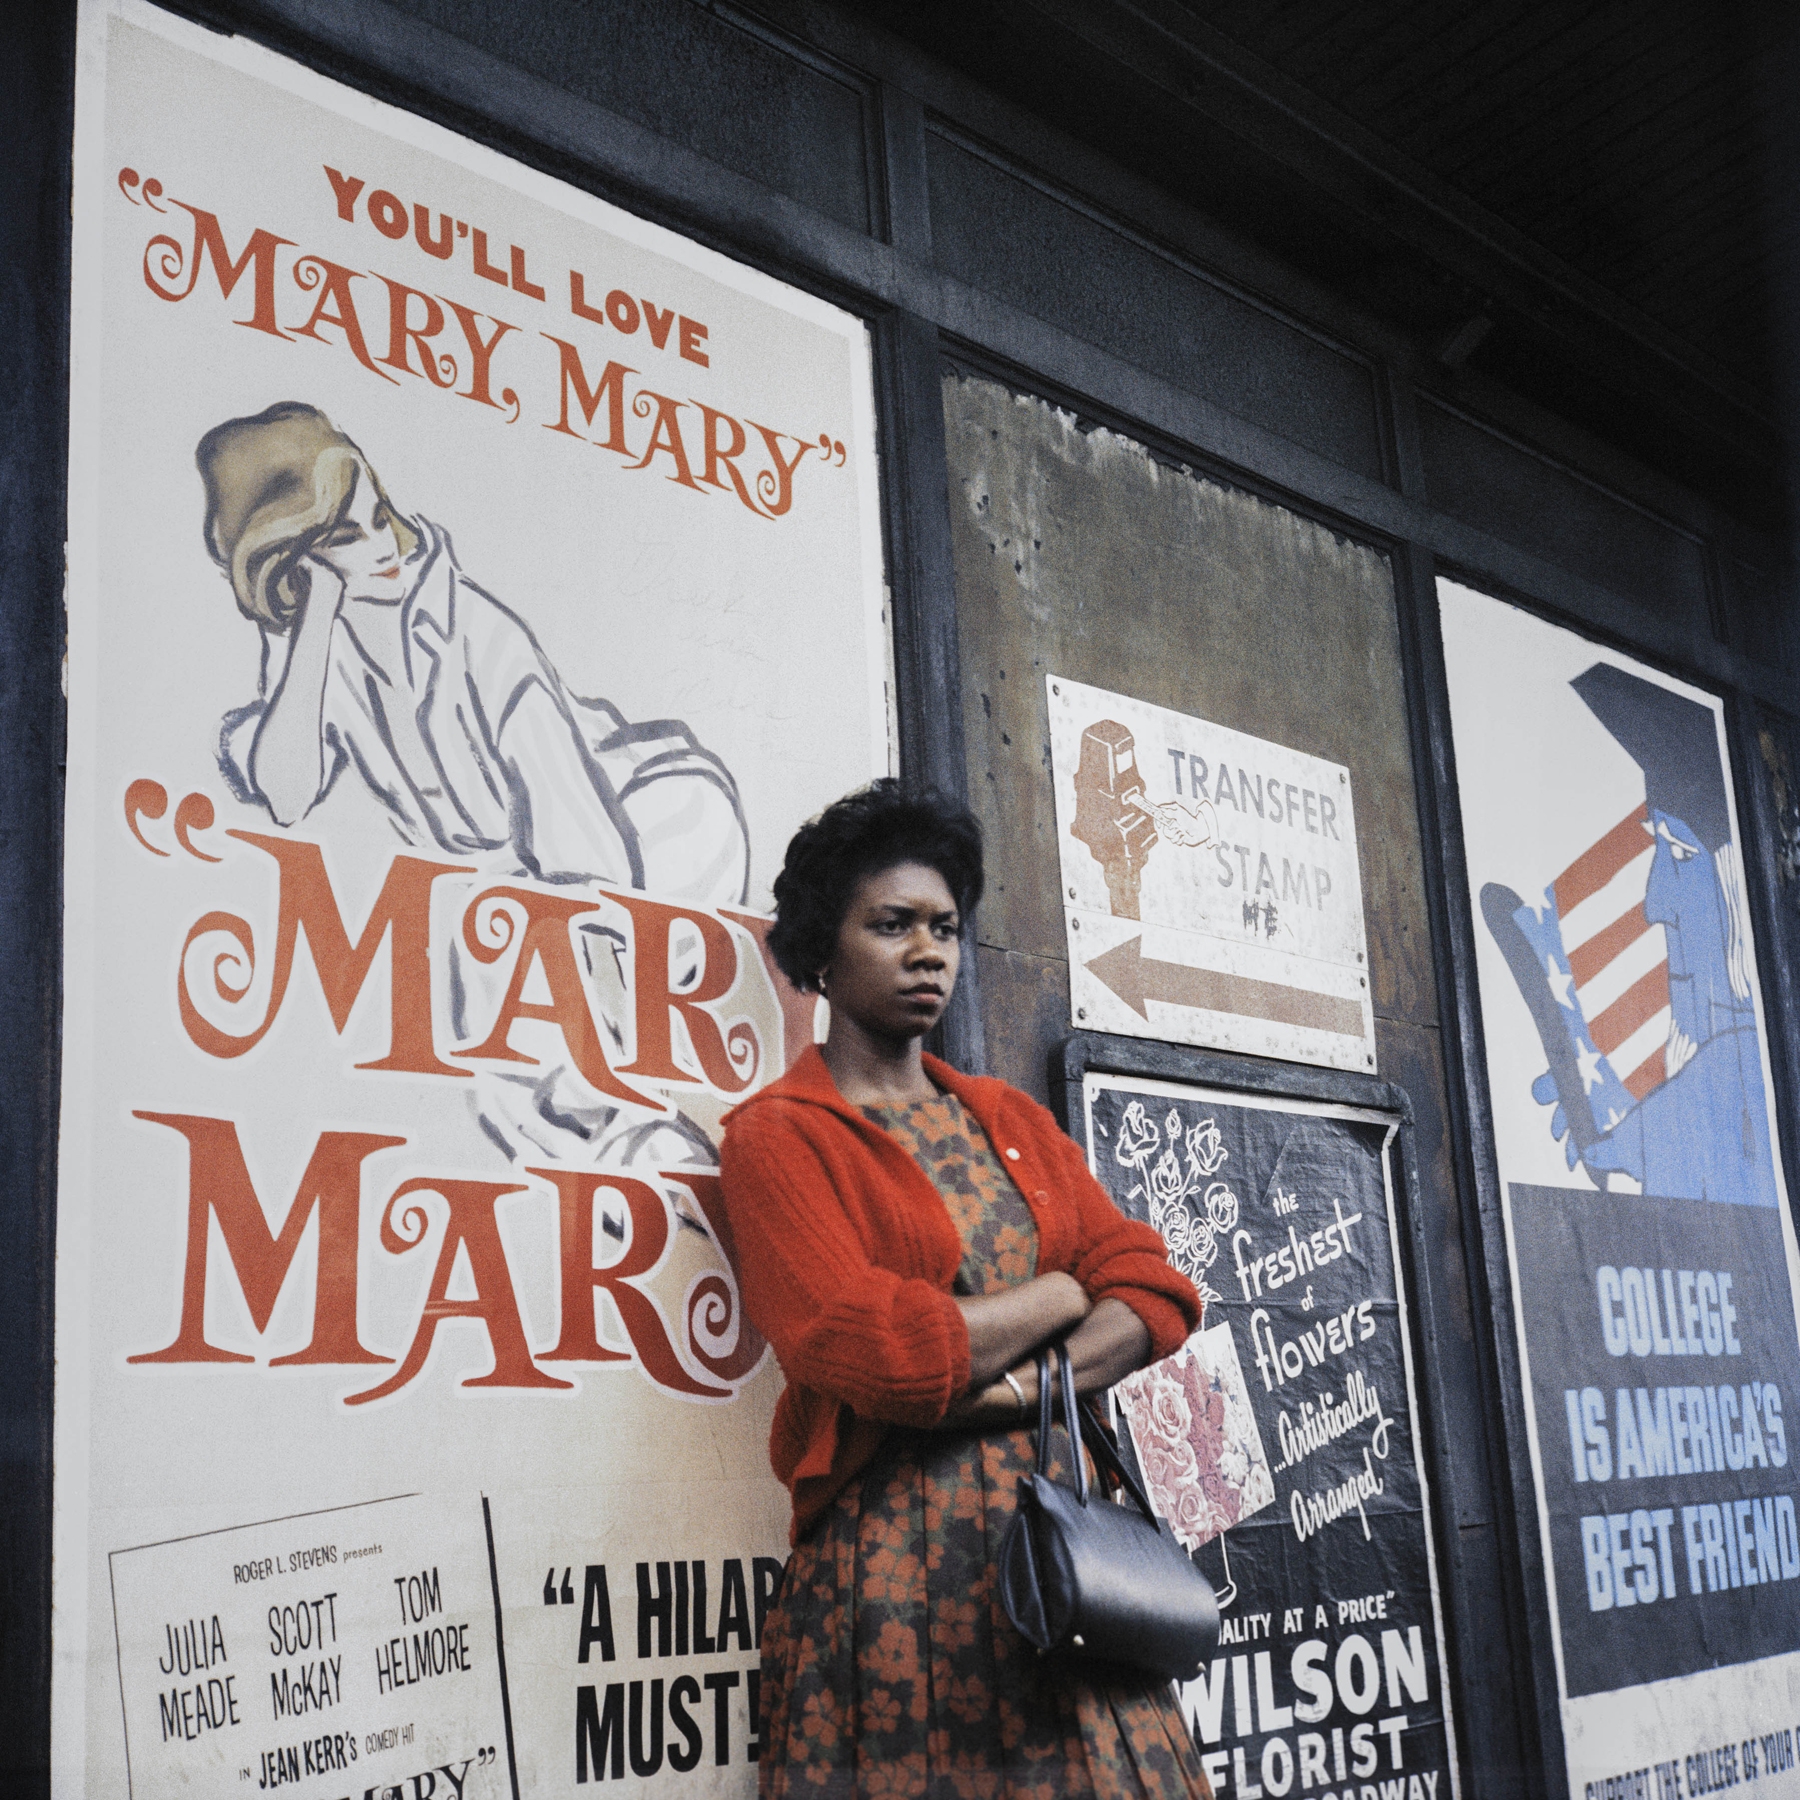 Vivian Maier Lecture and Q&A at Howard Greenberg Gallery